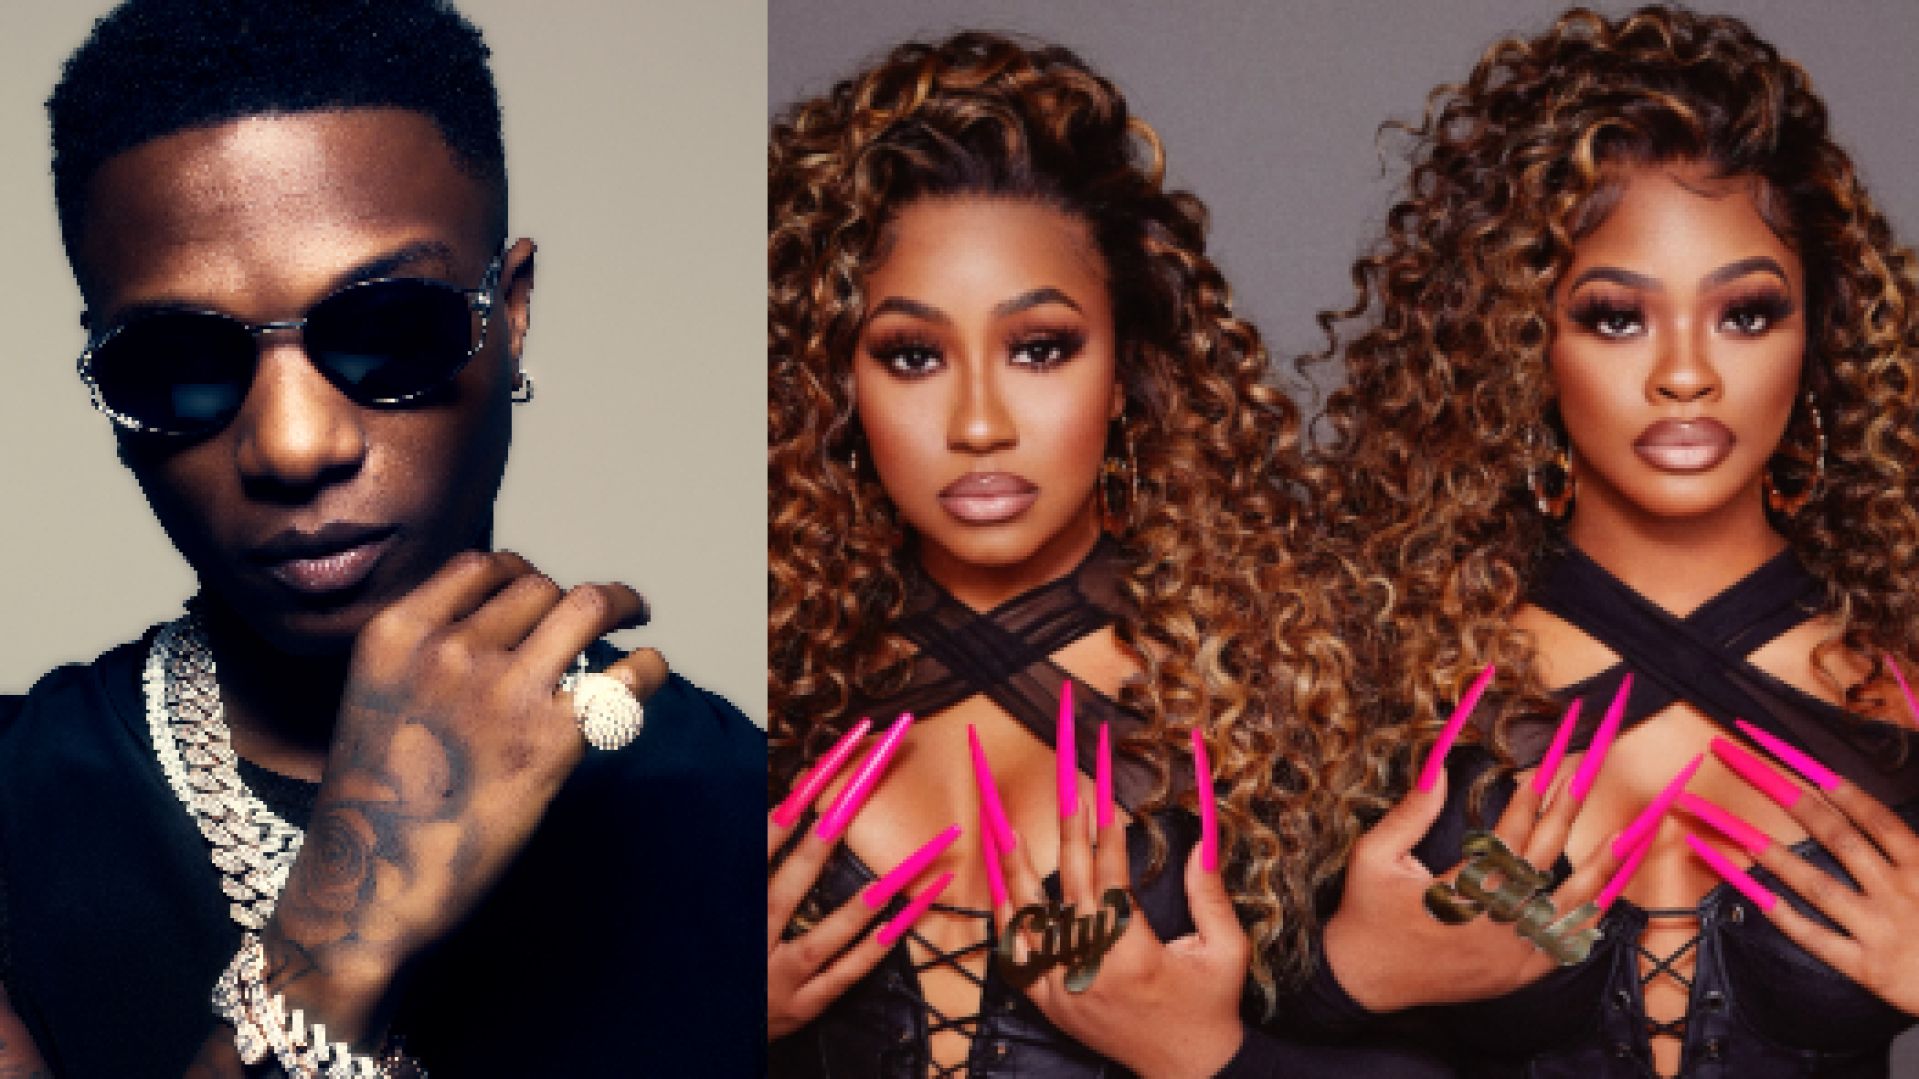 JUST ANNOUNCED: ESSENCE Fest Single-Night Tickets On Sale Plus, Wizkid, City Girls, Patti LaBelle, Method Man & More Join The Lineup!